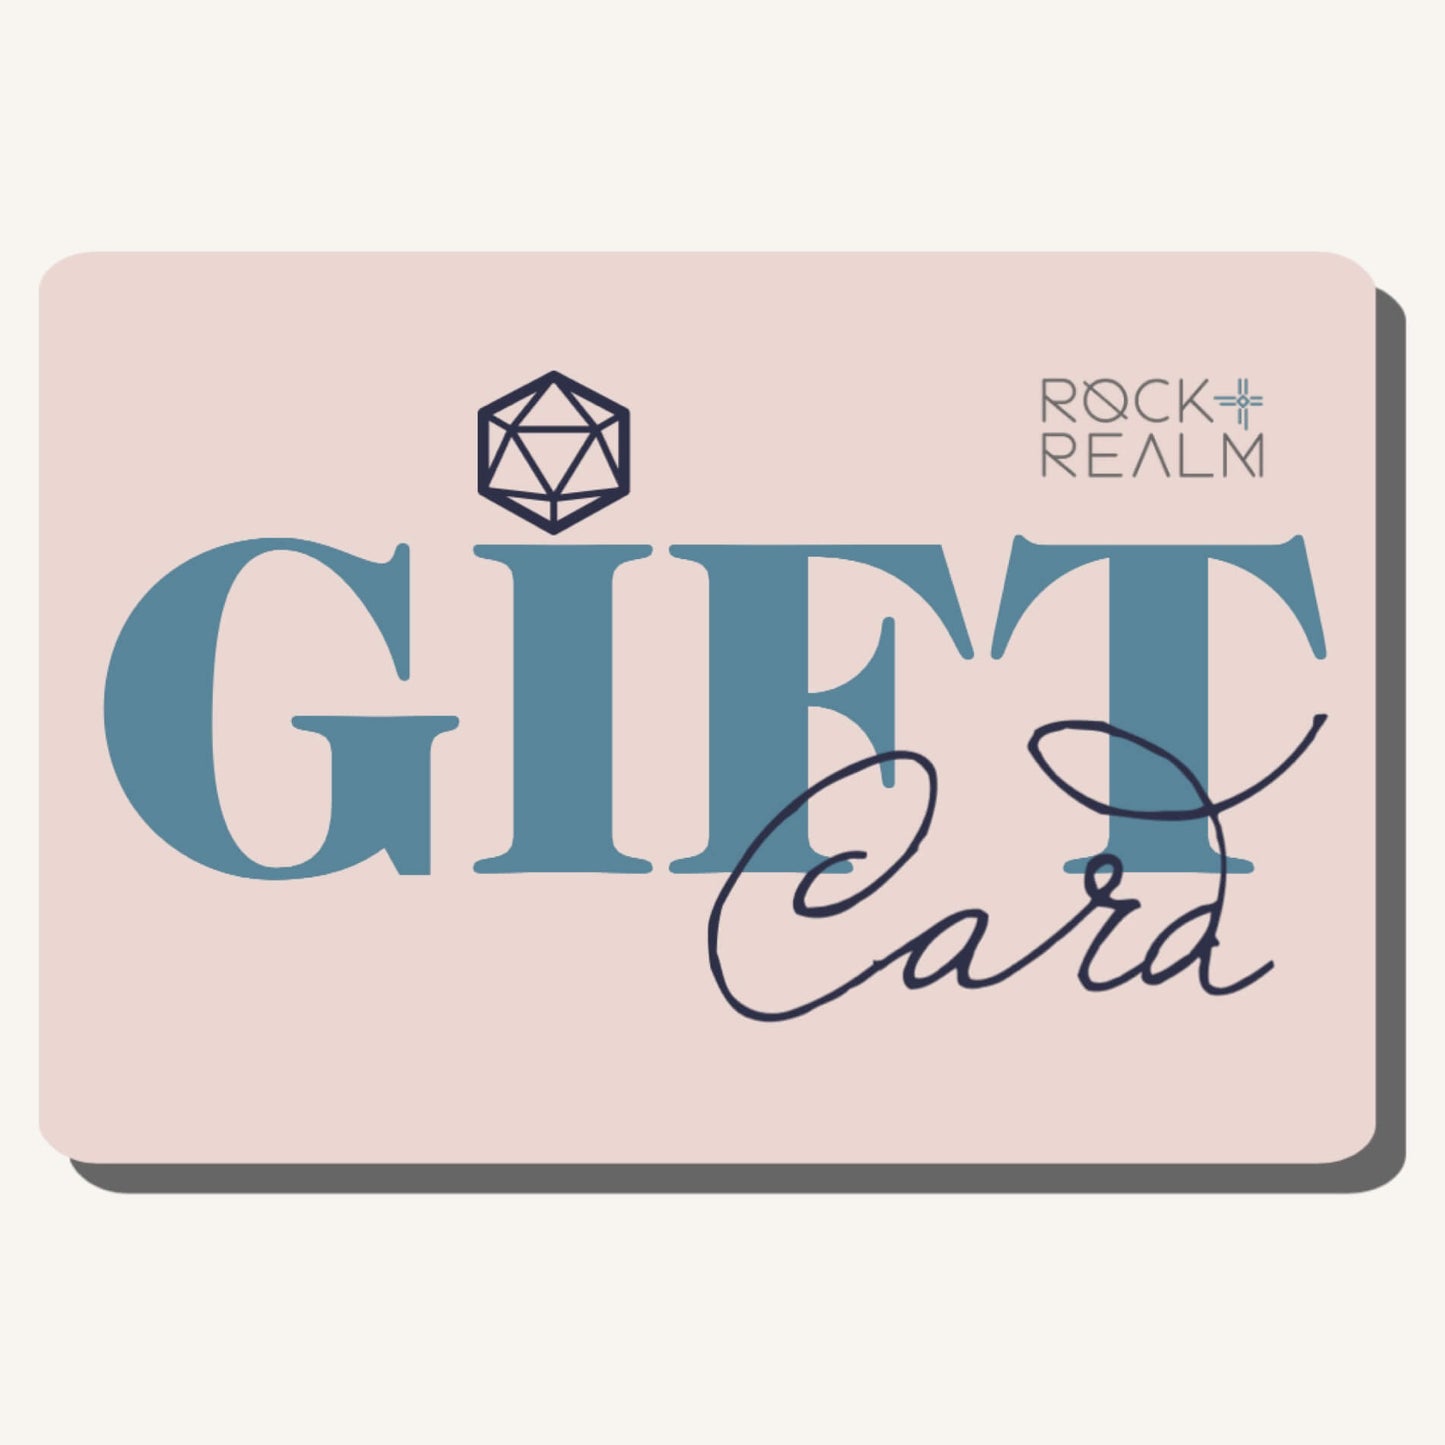 rock and realm gift card picture in pink and blue